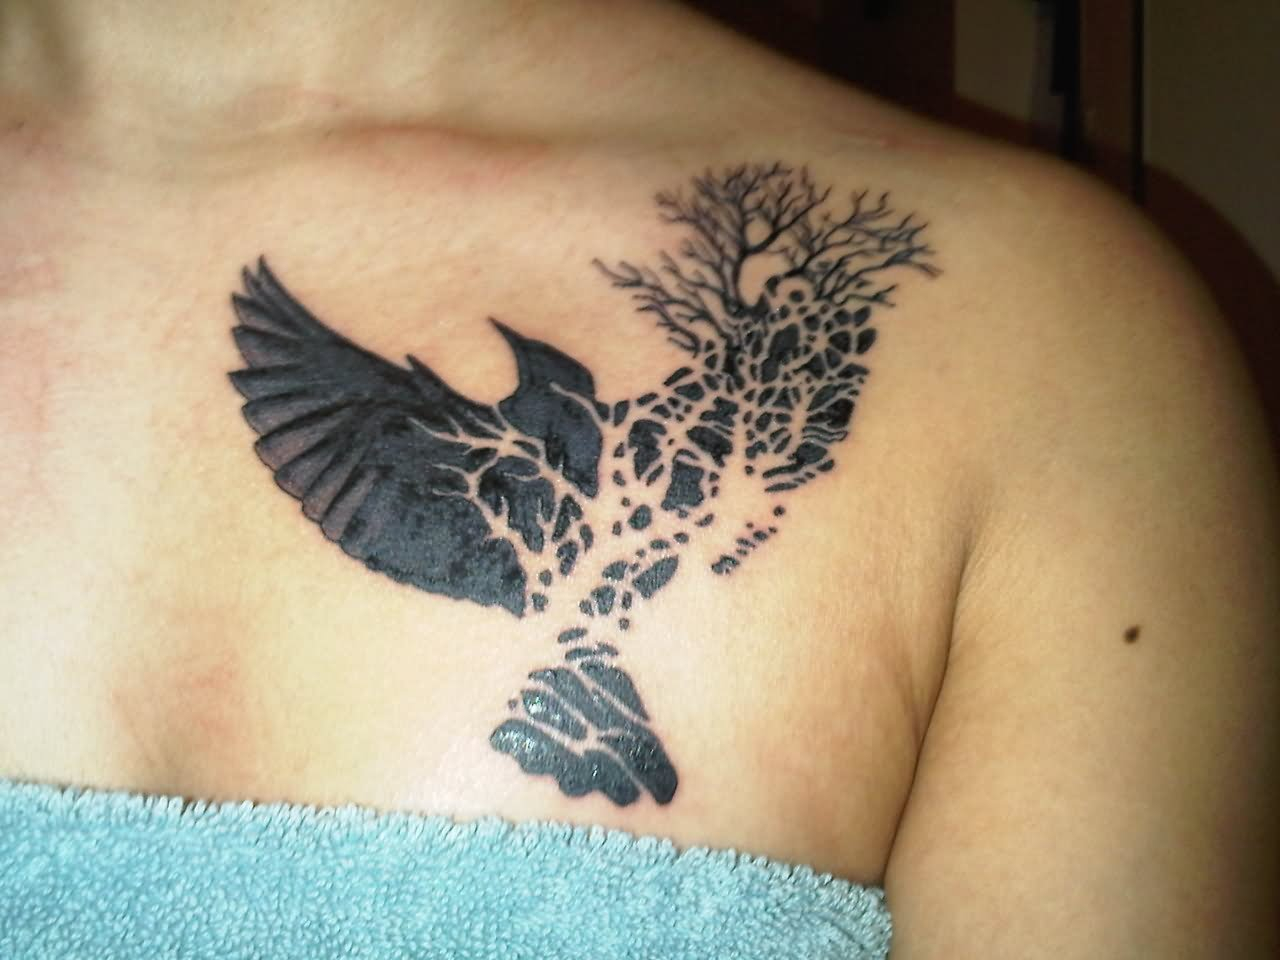 Black Bird Tattoo With Tree Tattoo On Front Shoulder in size 1280 X 960